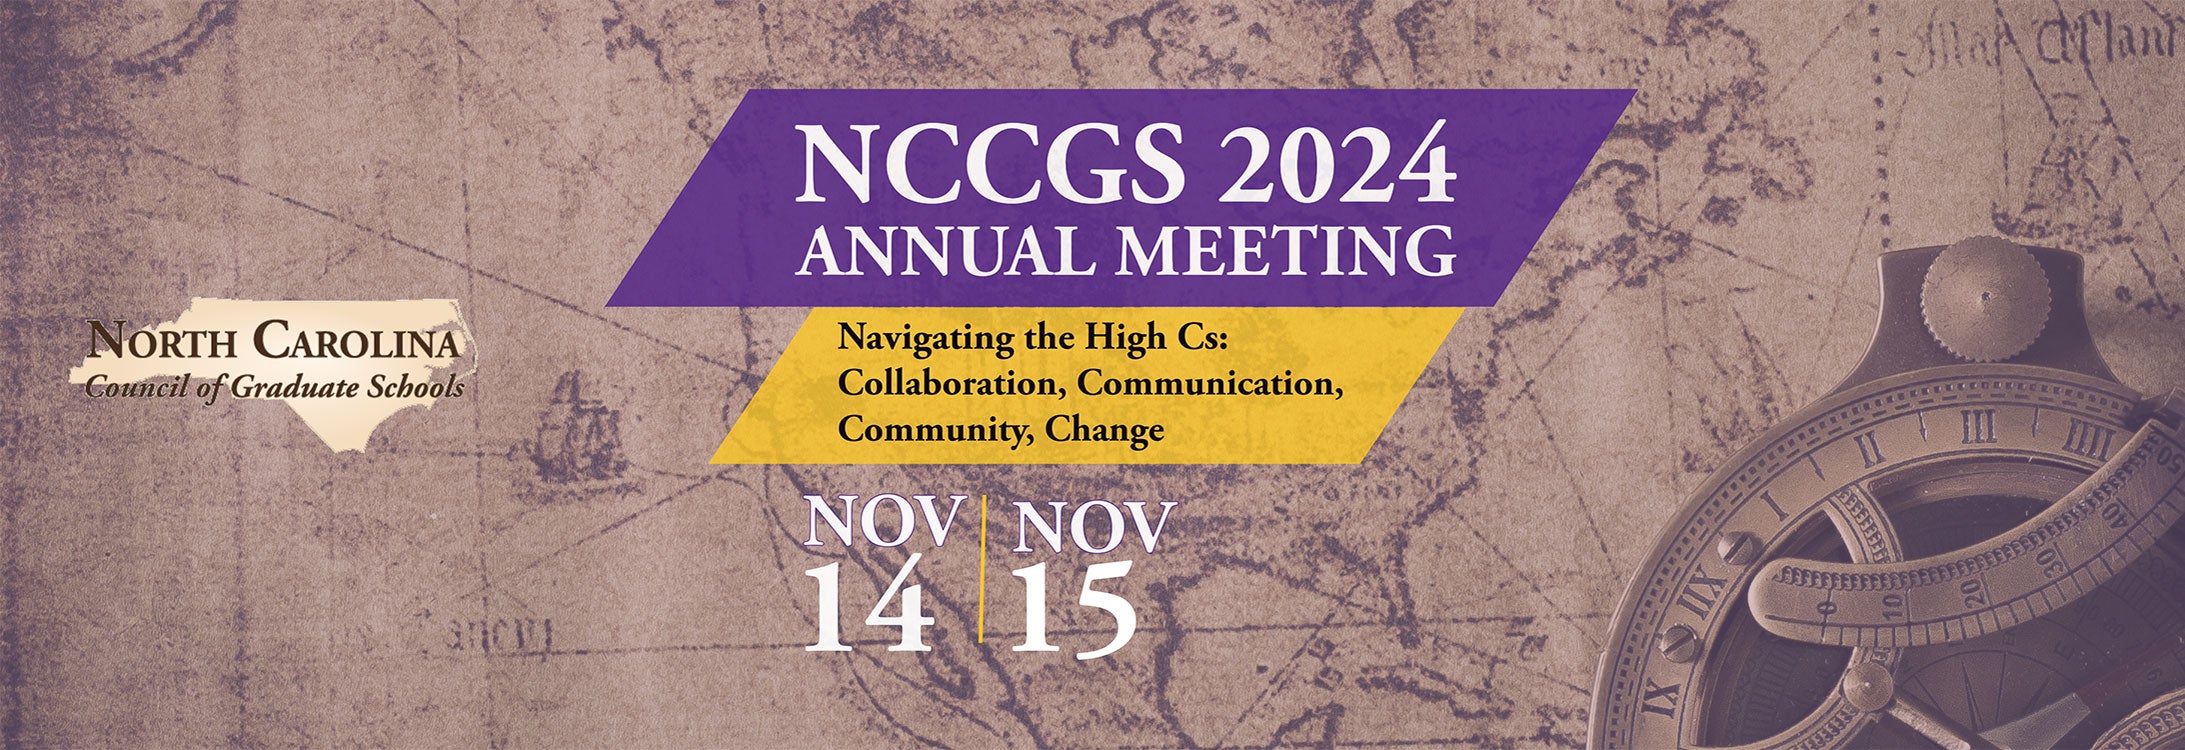 NCCGS Annual Meeting-Hosted by ECU Graduate School-Nov 14 and 15